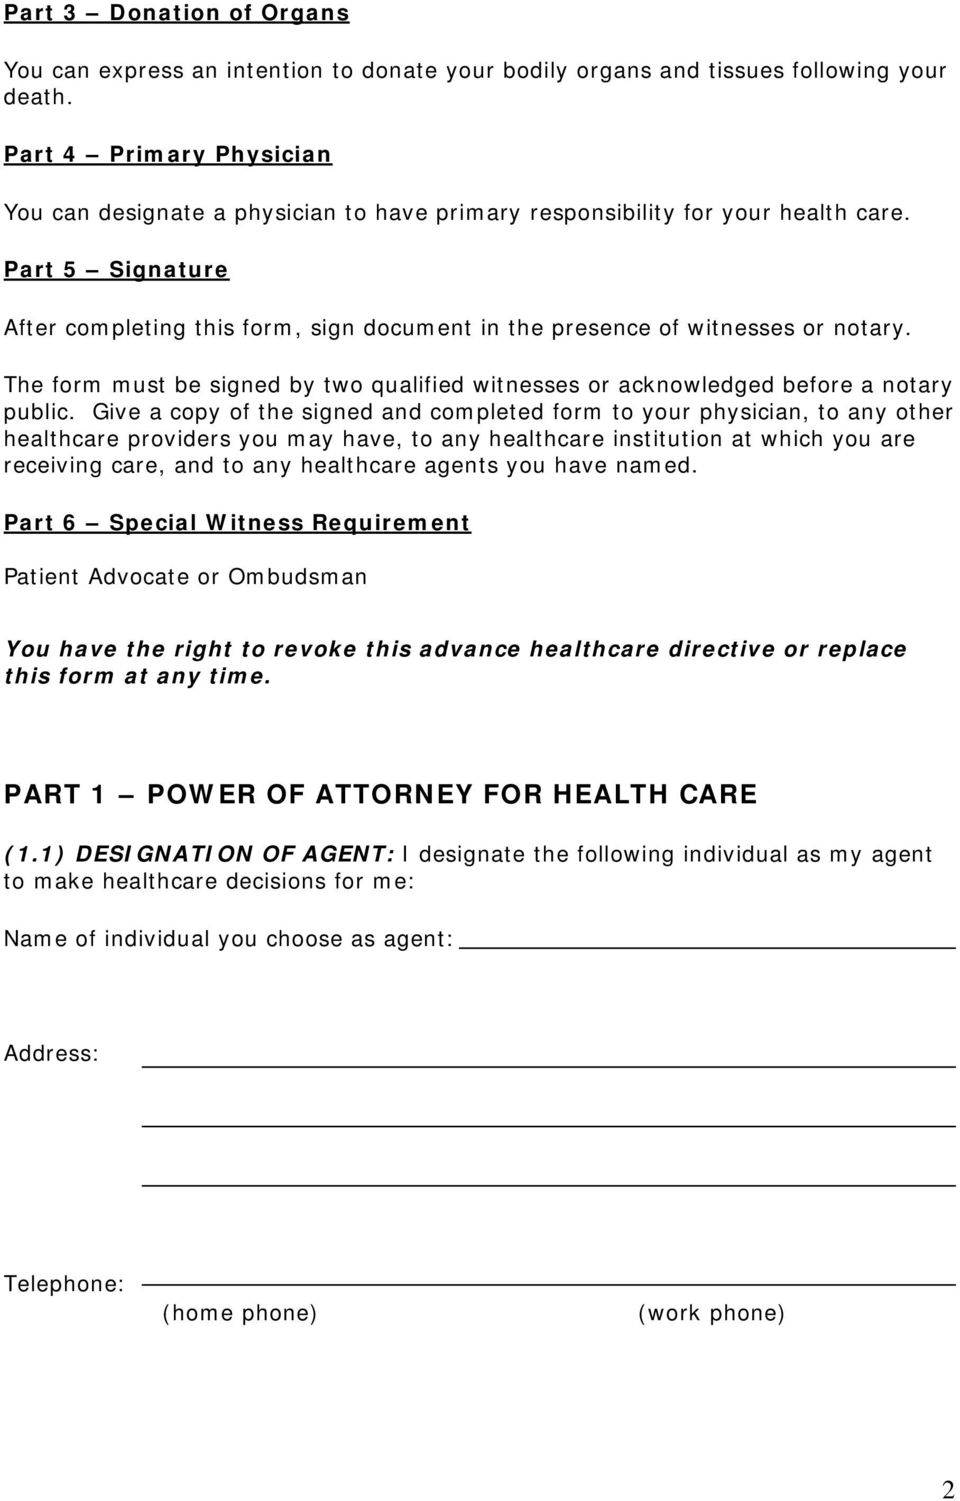 Part 5 Signature After completing this form, sign document in the presence of witnesses or notary. The form must be signed by two qualified witnesses or acknowledged before a notary public.